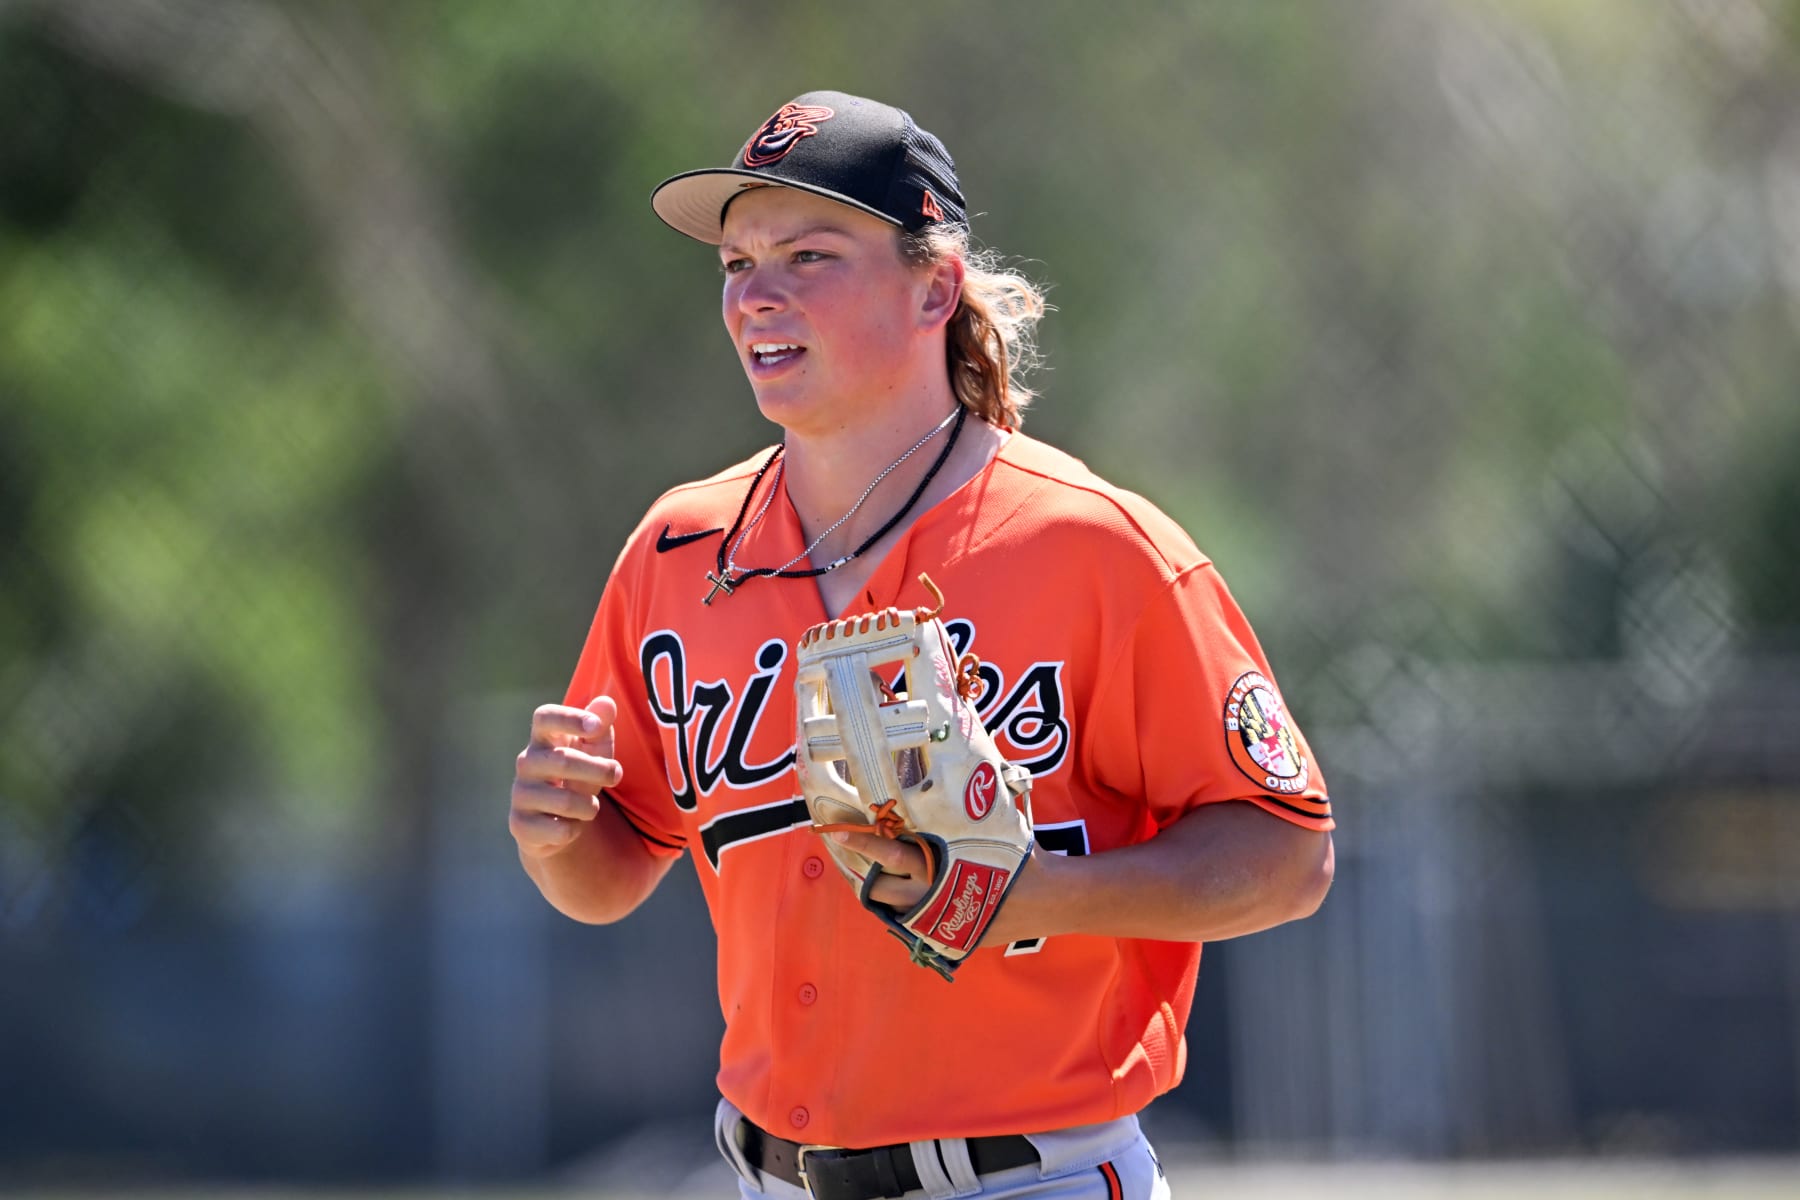 Astros nab slugger Gilbert in MLB Draft: 'If I didn't have the